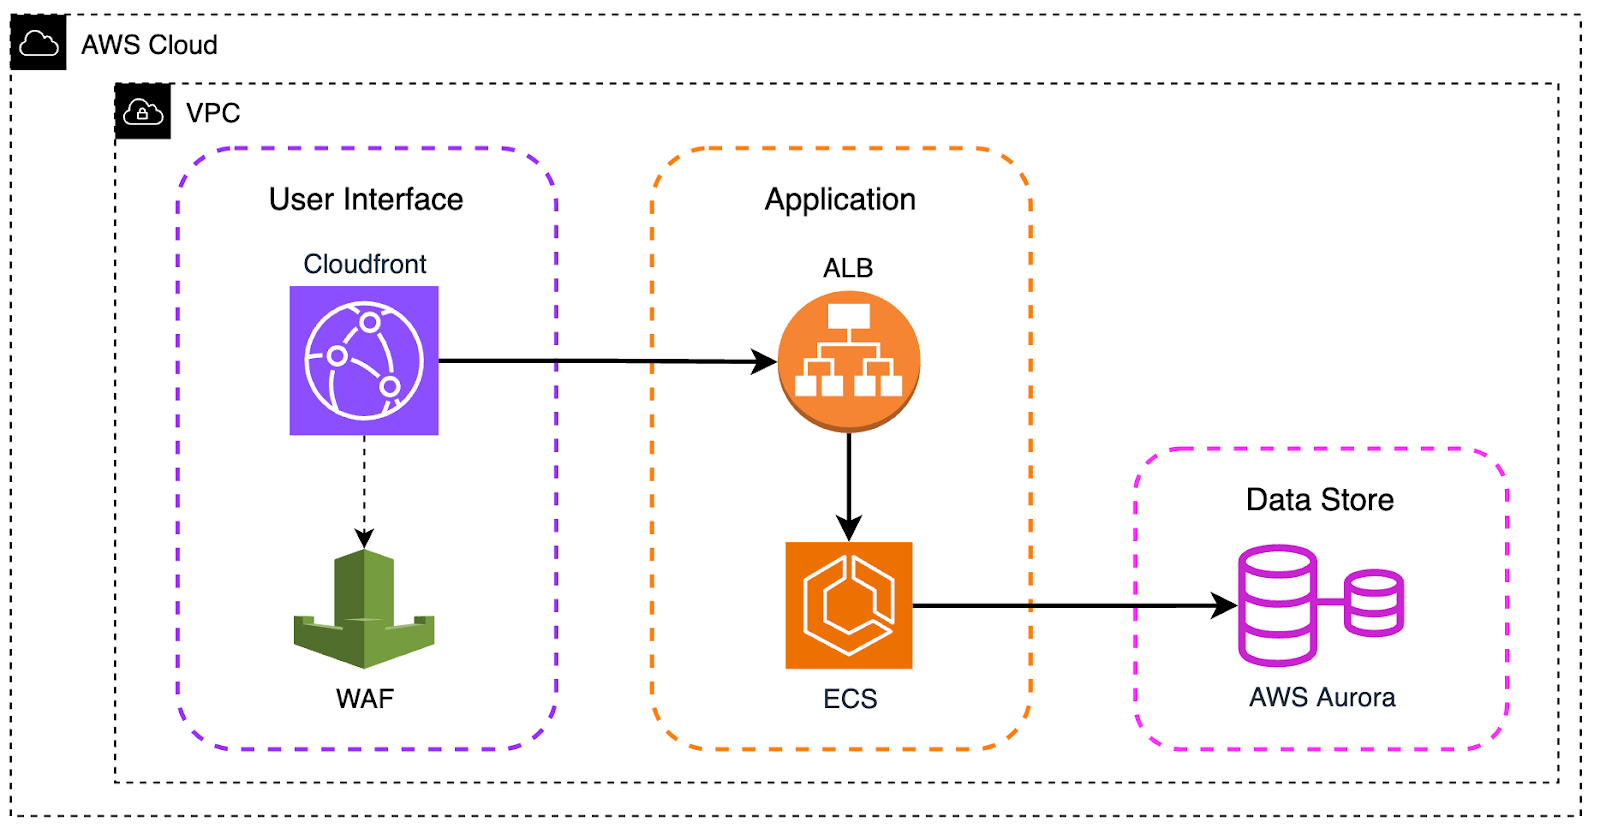 The AWS solution architecture for WWEEVV app.